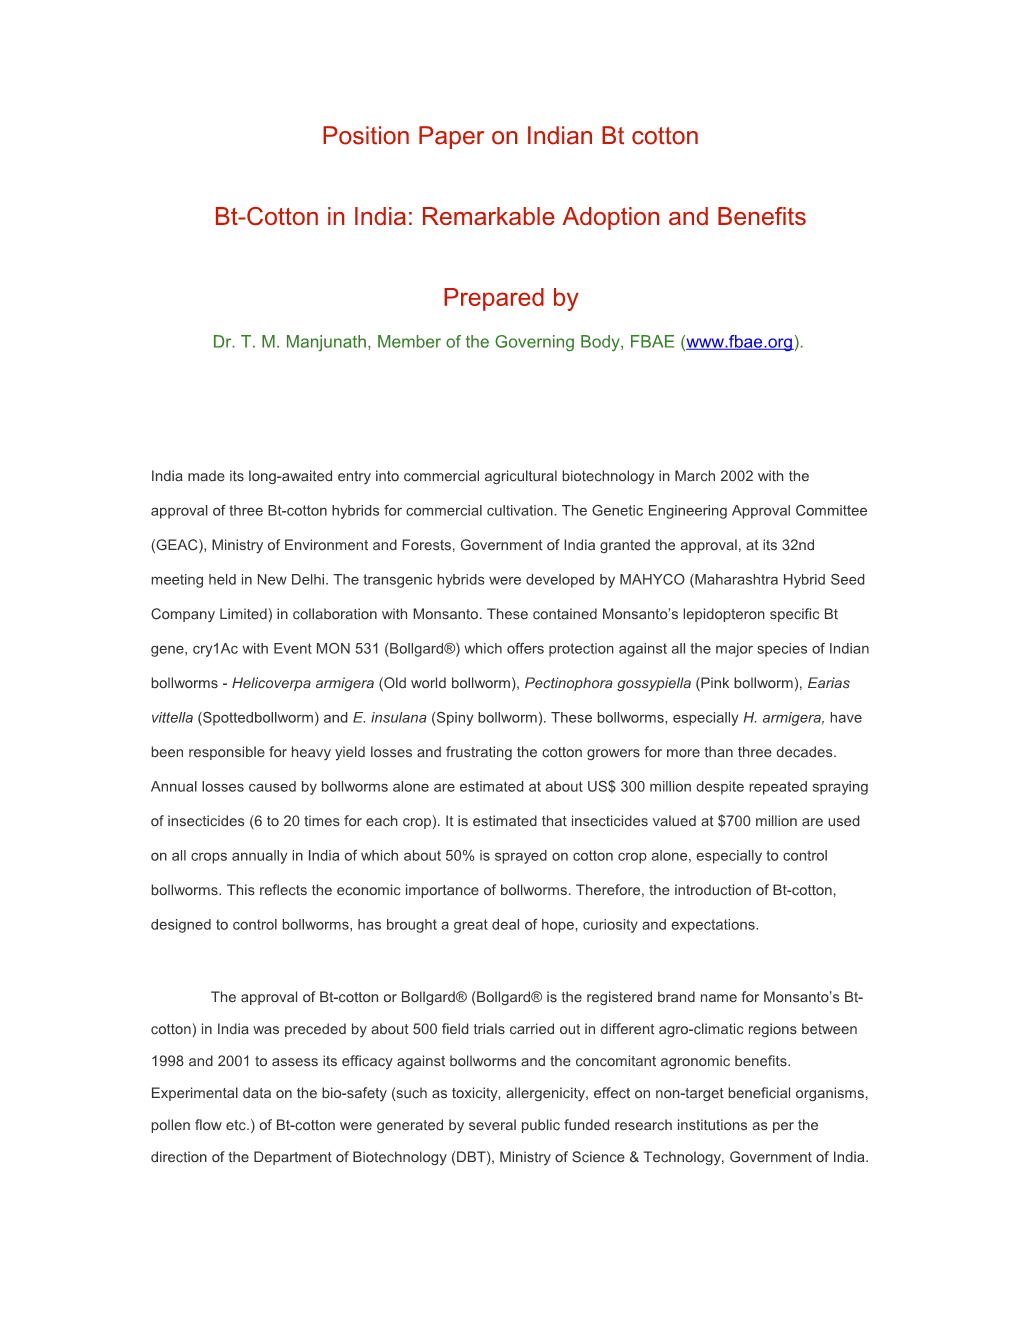 Position Paper on Indian Bt Cotton